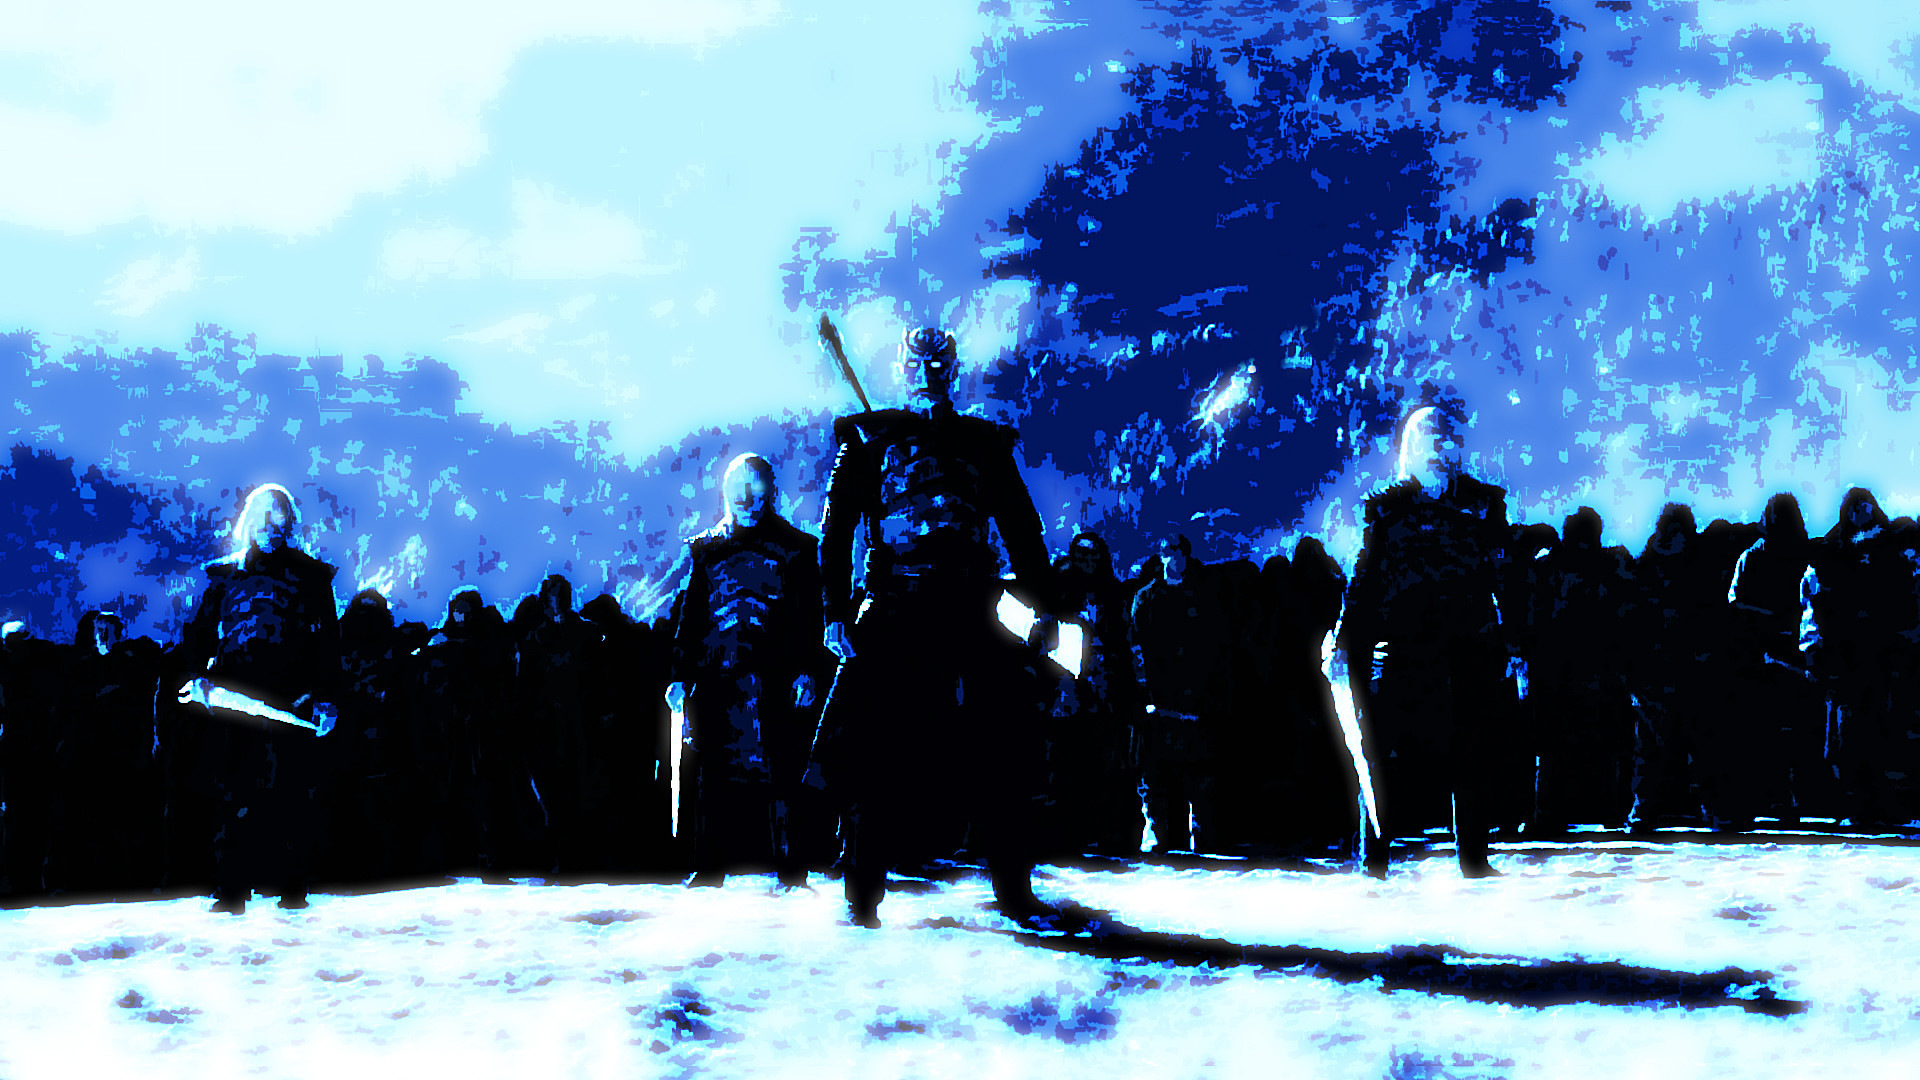 1920x1080 ... Game of Thrones - The Night's King' Army by SmushrCZ